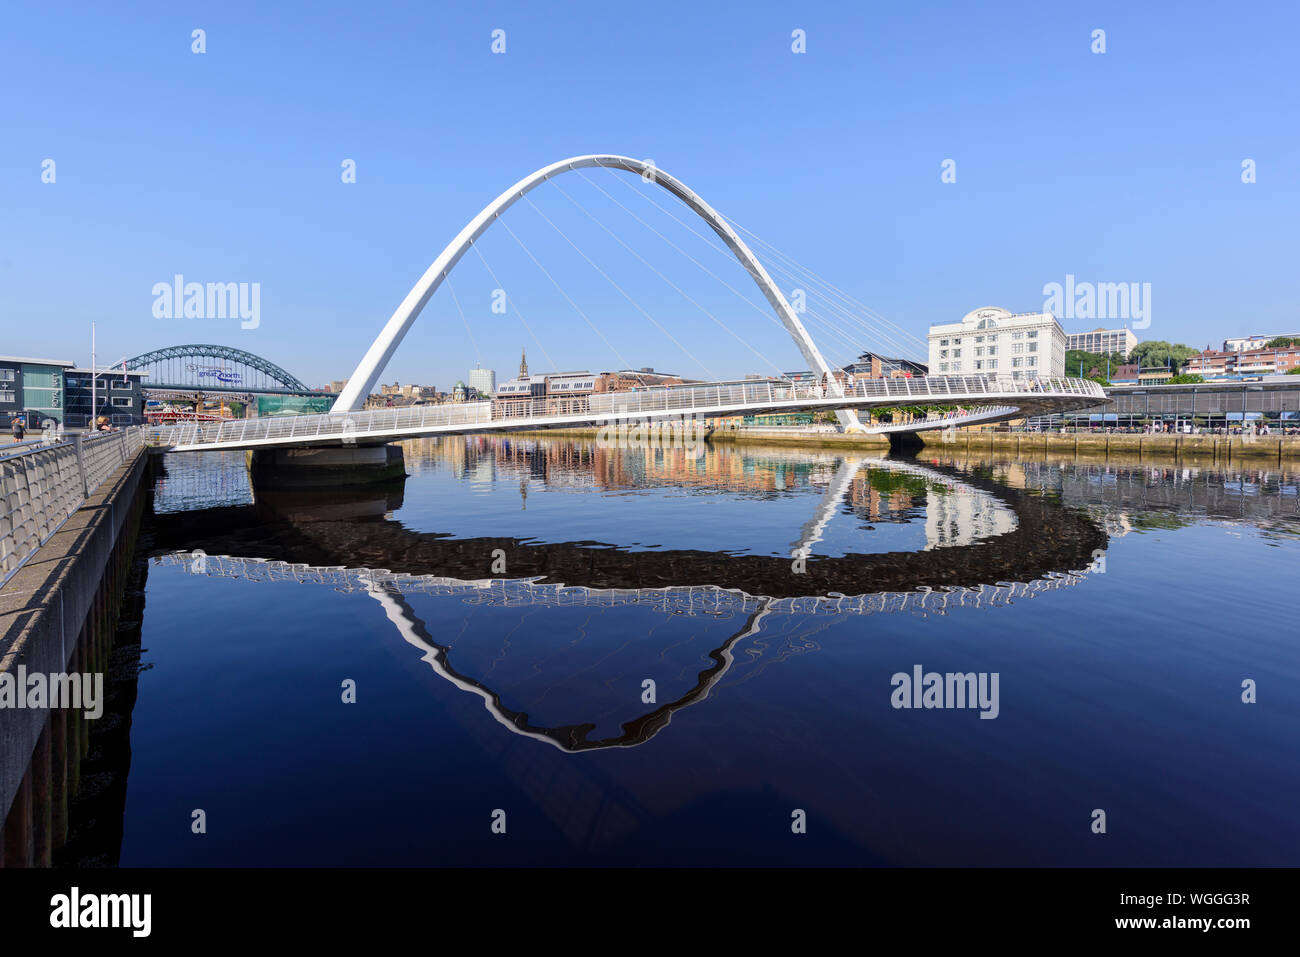 Under a blue sky Newcastle upon Tyne and Millennium Bridge viewed from Gateshead side of river Tyne Stock Photo